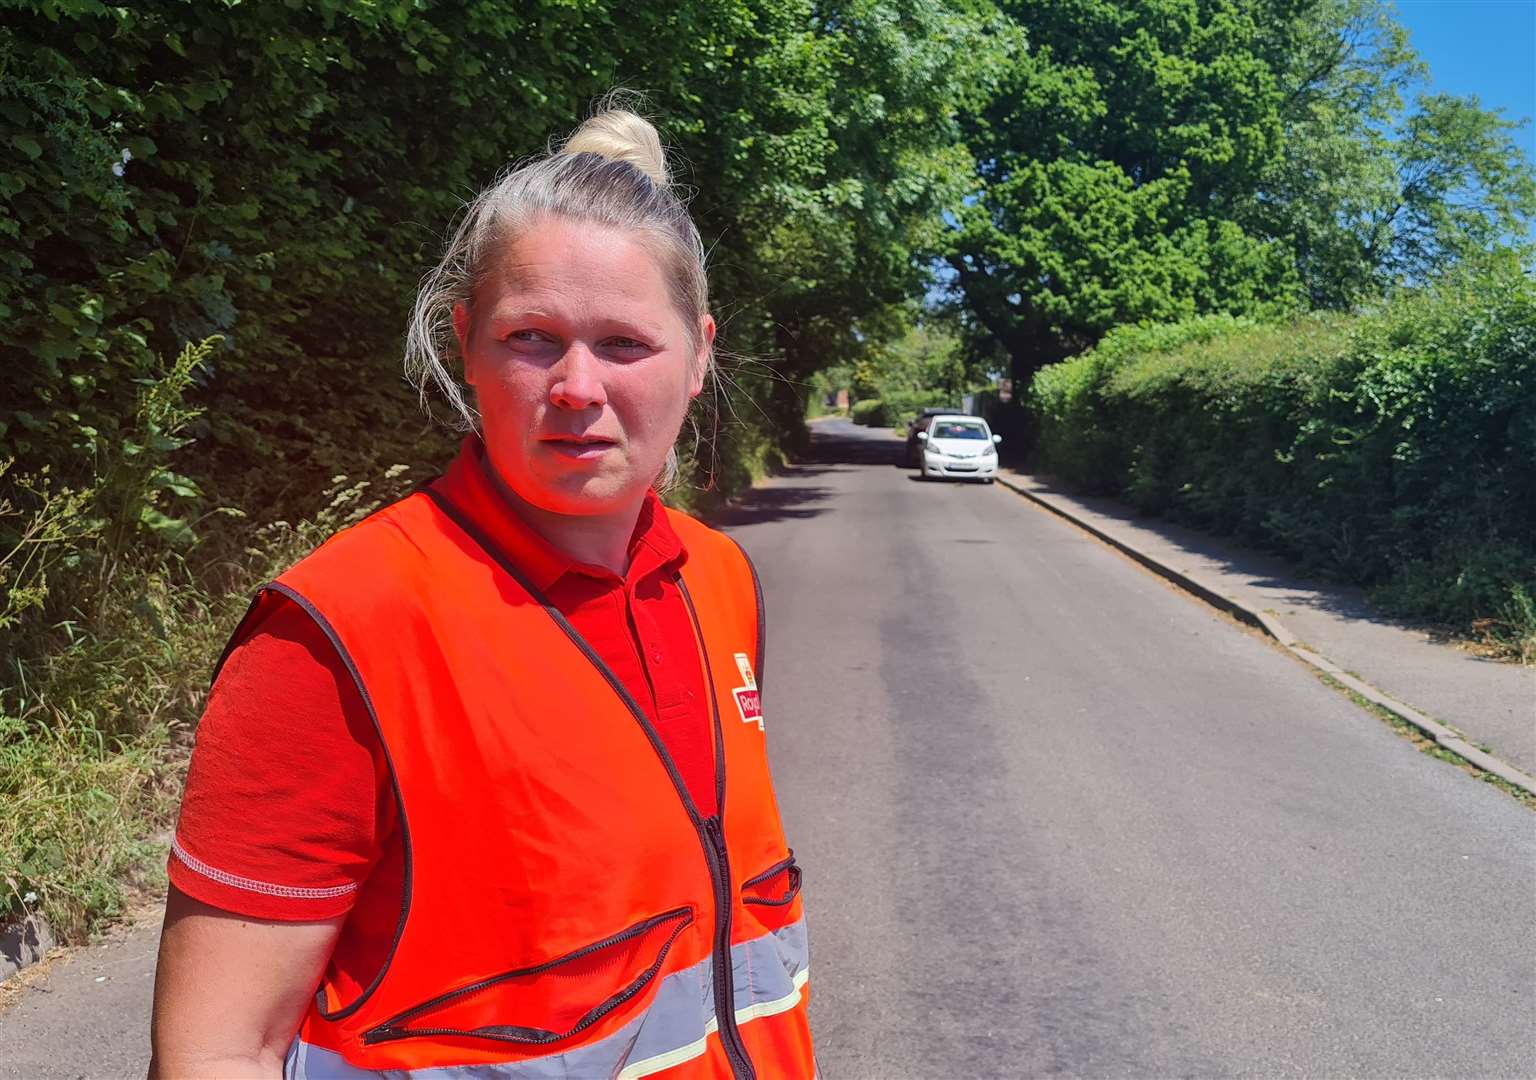 Postal worker Leanne Porter, 39, rescued the toddler from Bossingham Road in June